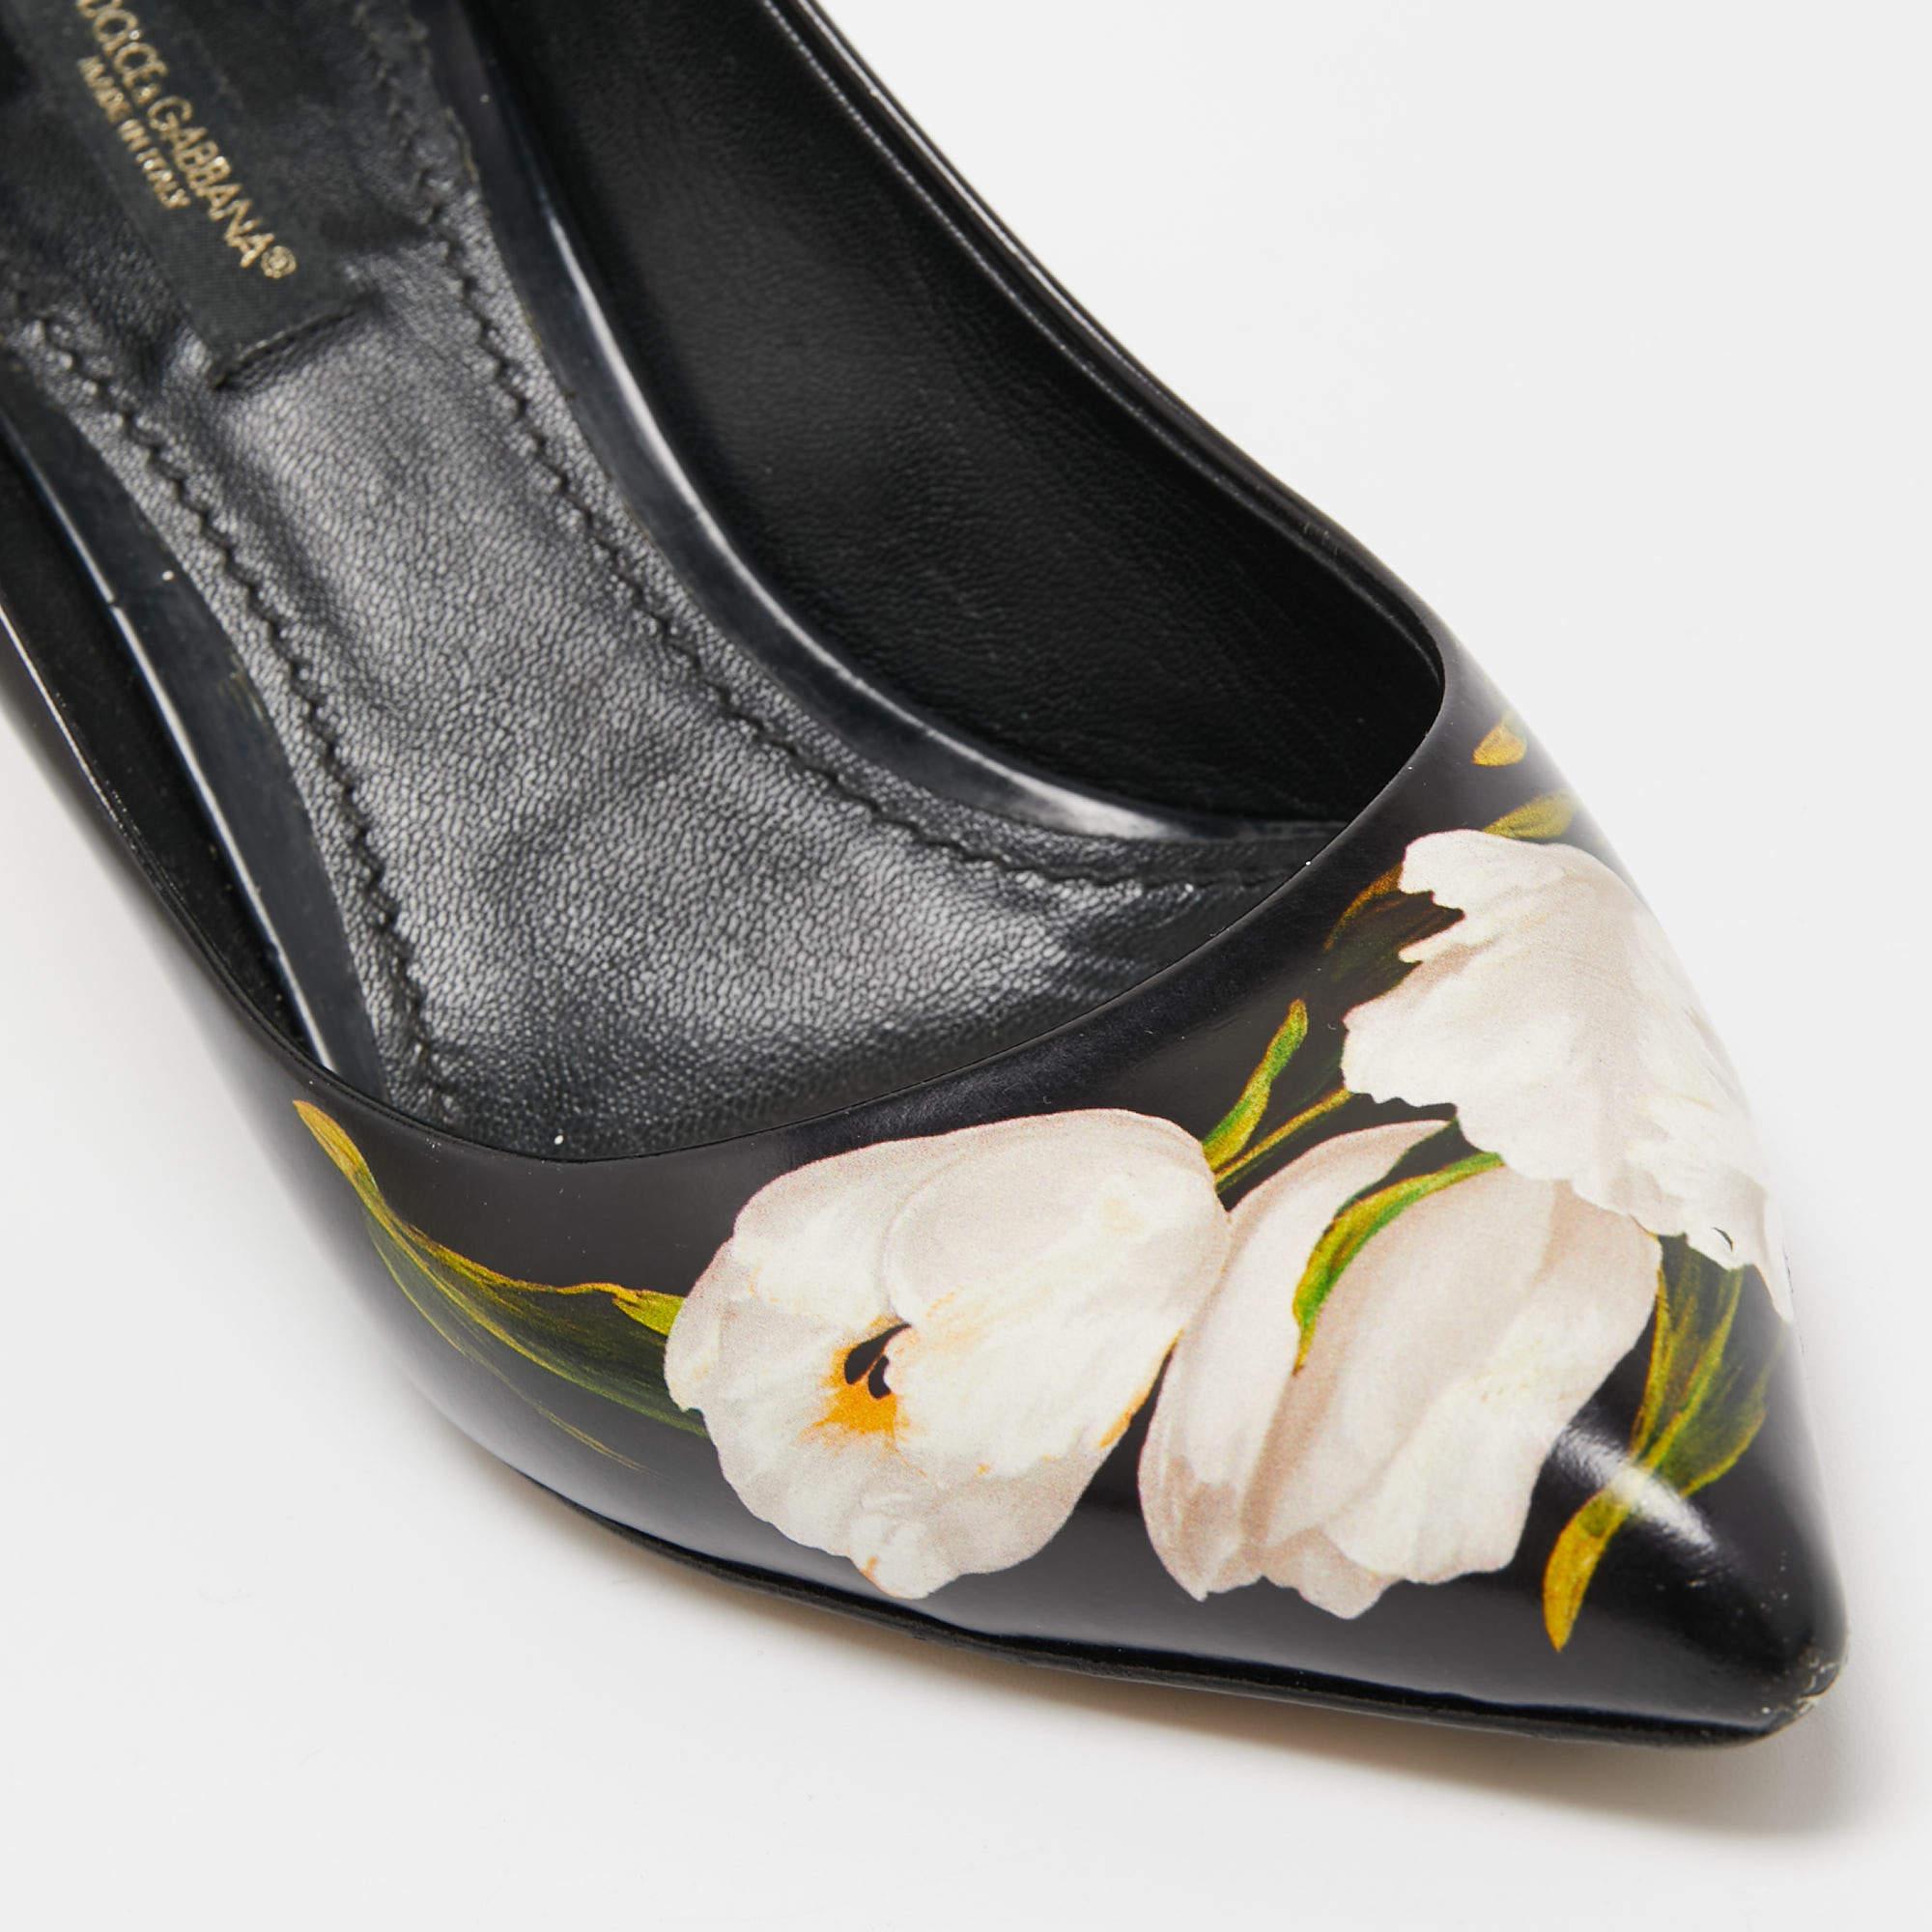 Dolce & Gabbana Black Floral Print Leather Pointed Toe Pumps Size 36 3